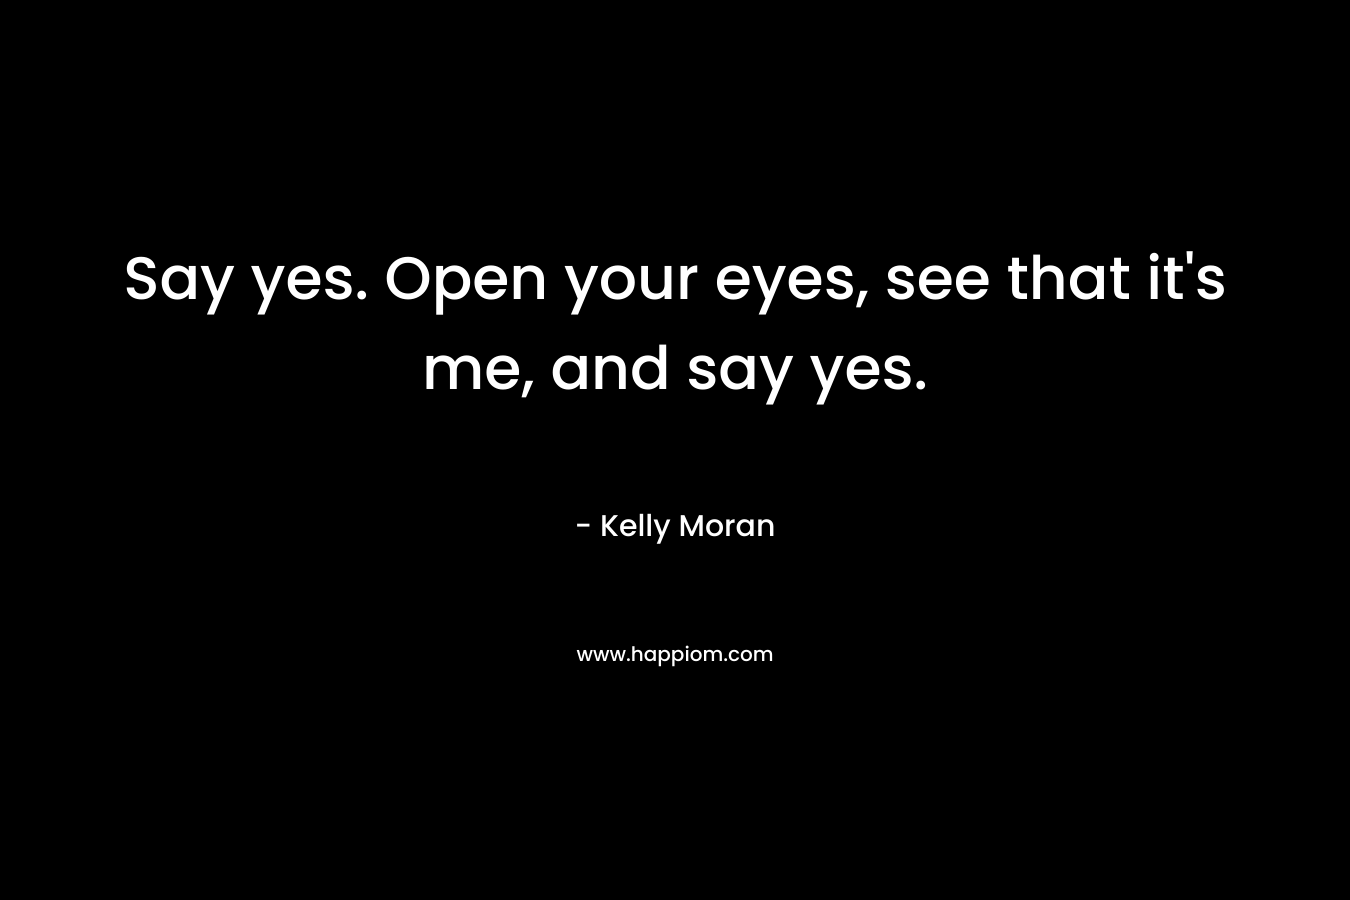 Say yes. Open your eyes, see that it's me, and say yes.